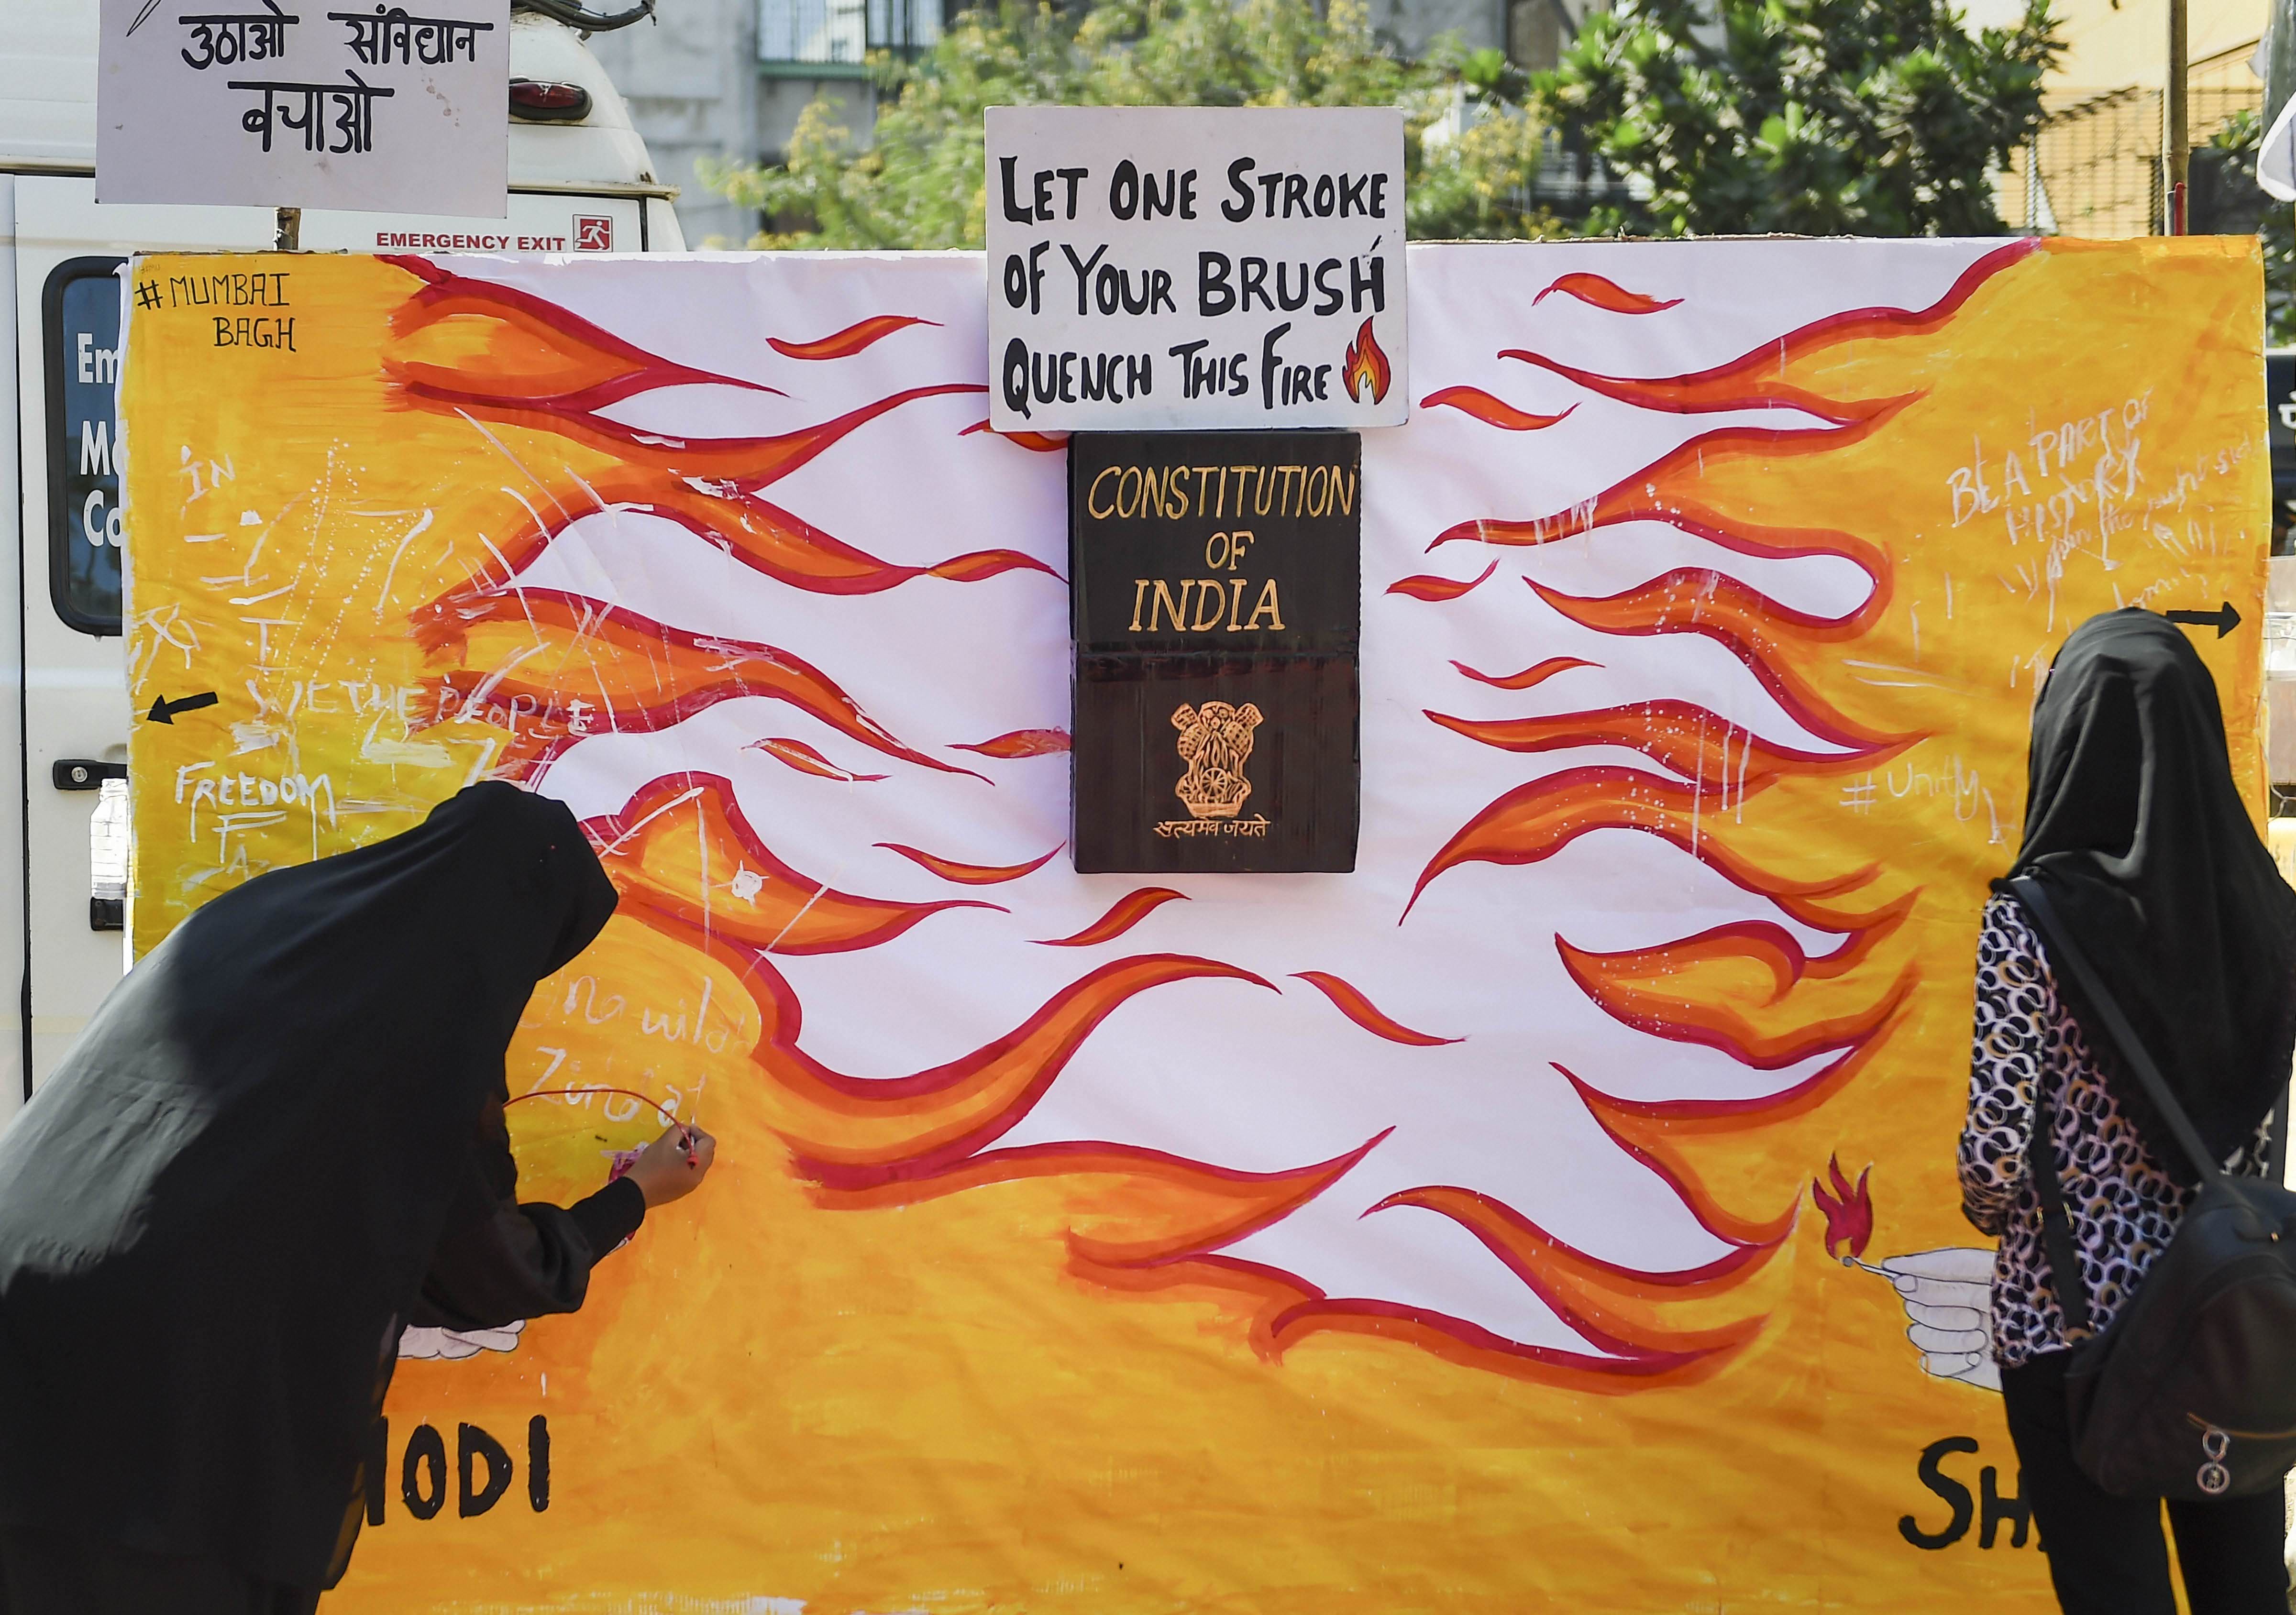 Protesters write on a wall during an anti-Citizenship Amendment Act (CAA) demonstration, in Mumbai on Thursday